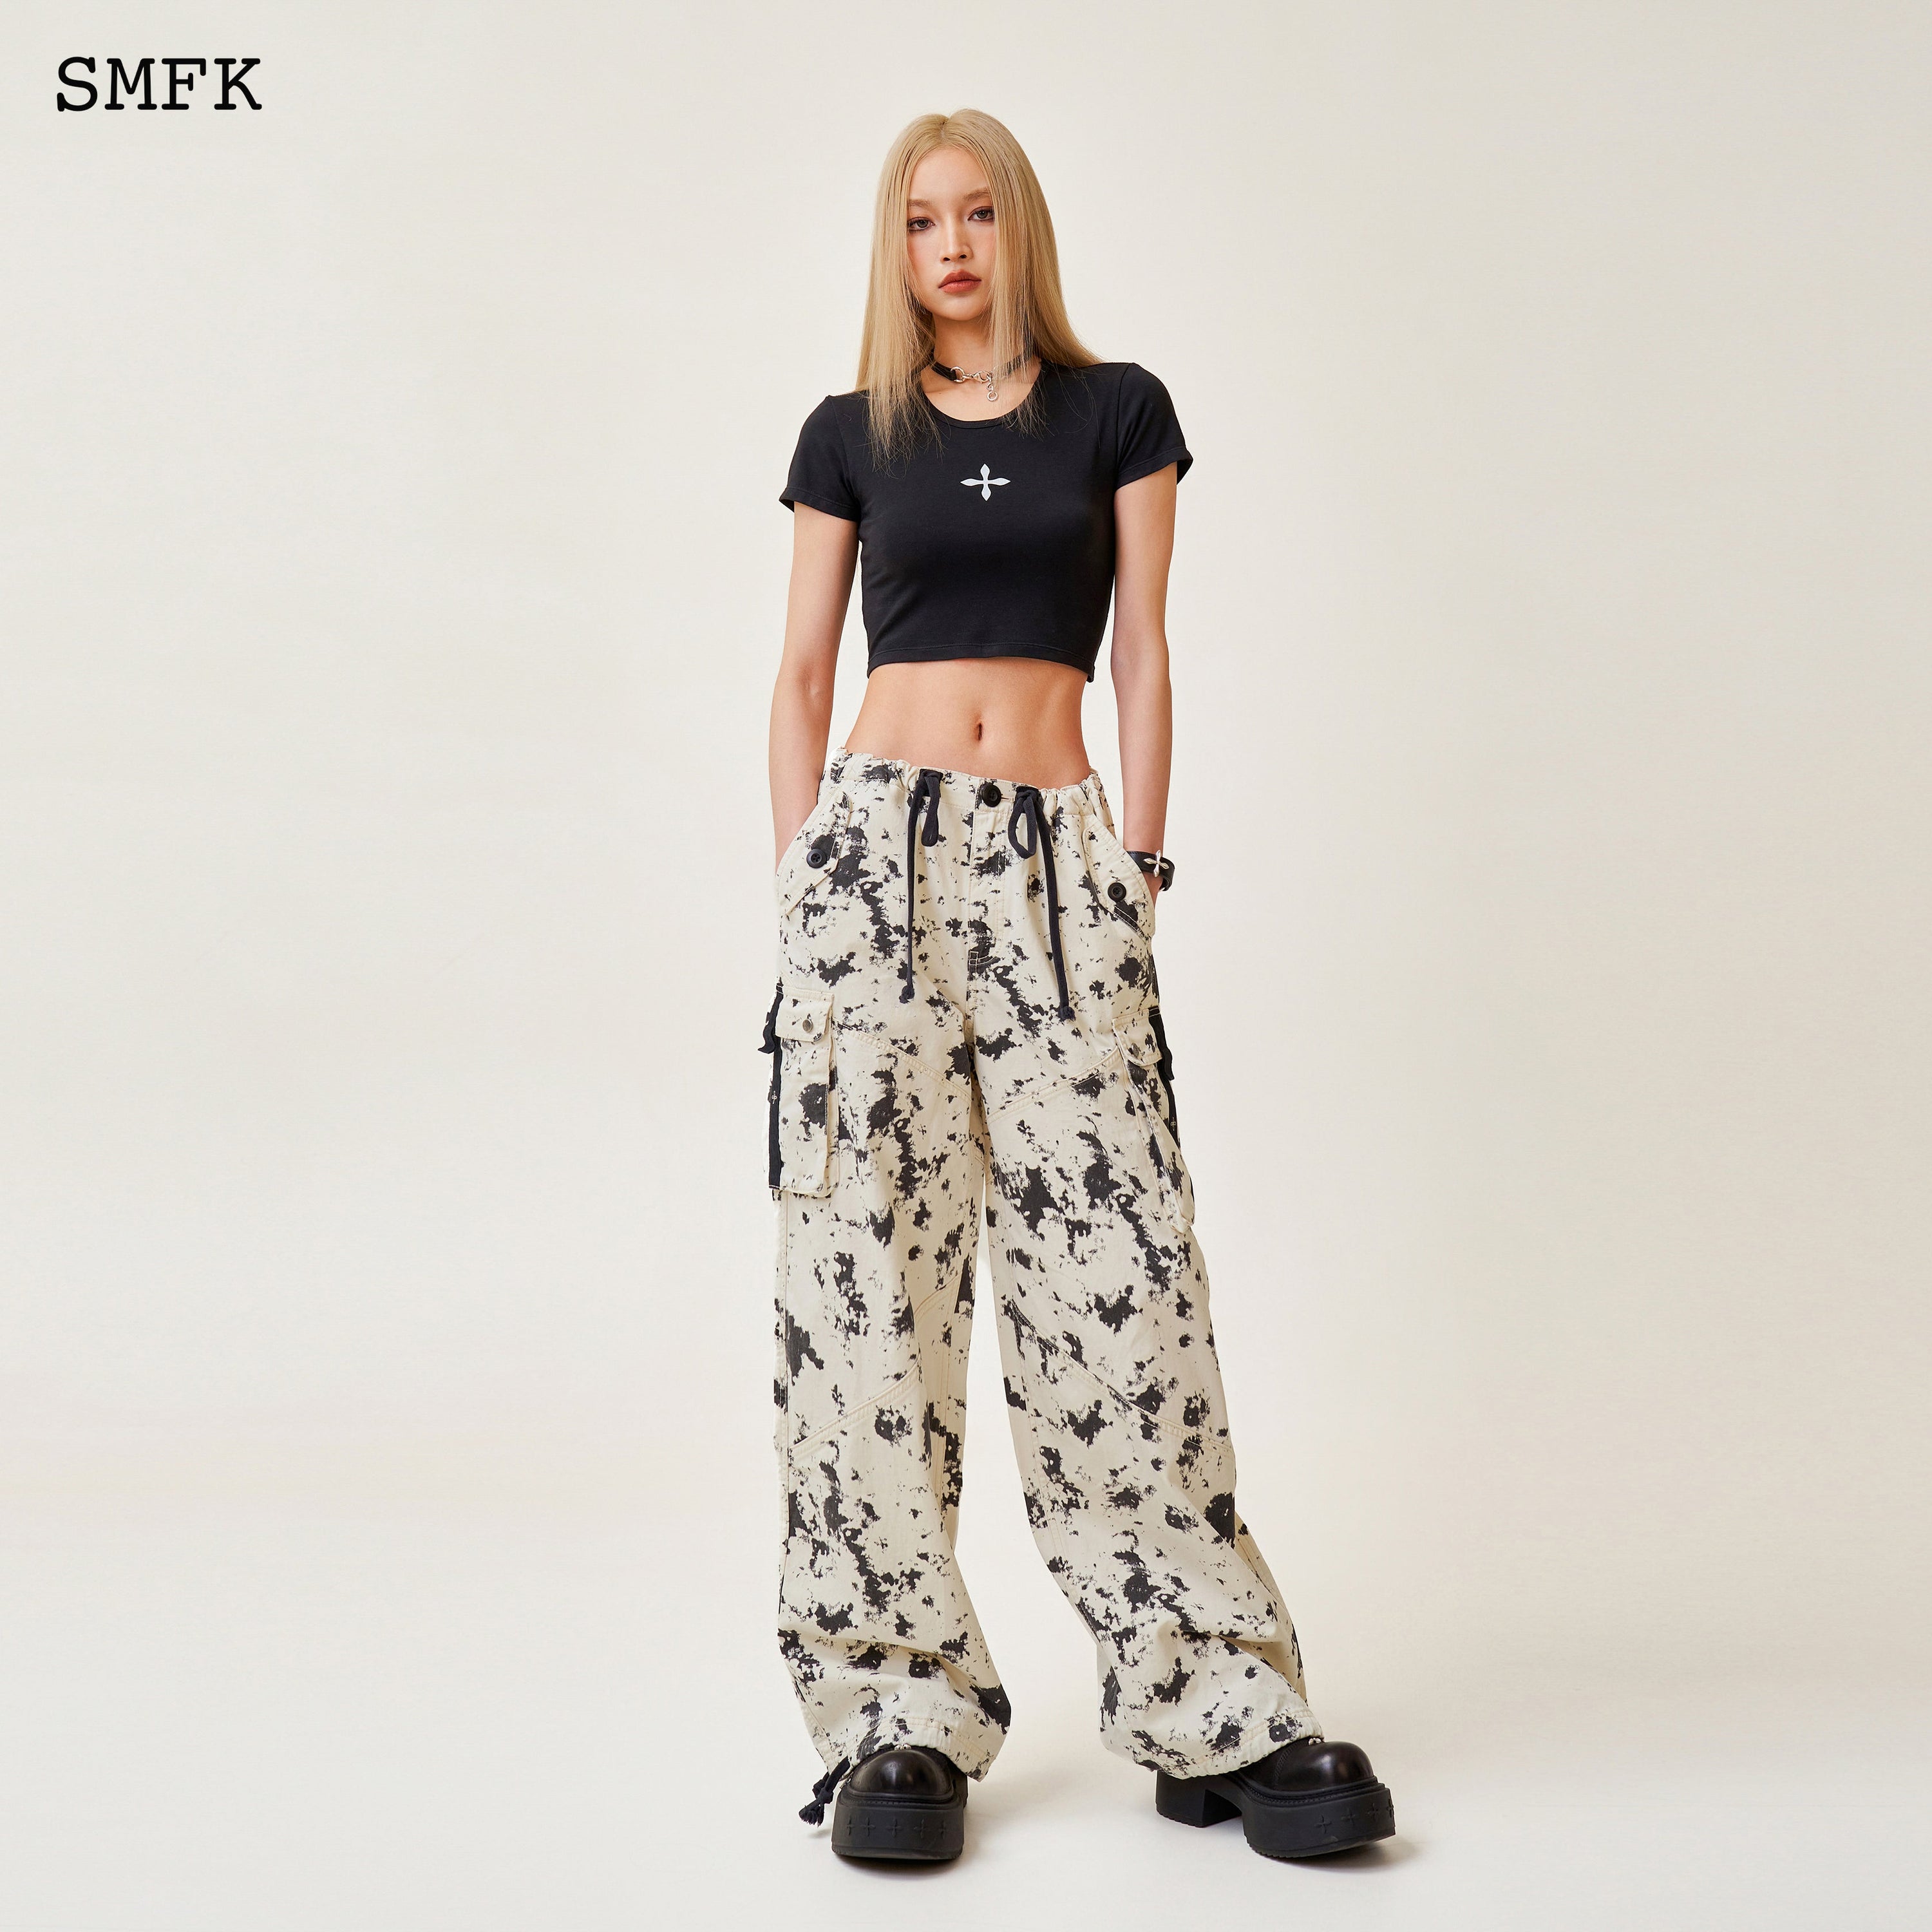 Compass White Camouflage Retro Paratrooper Pants - SMFK Official